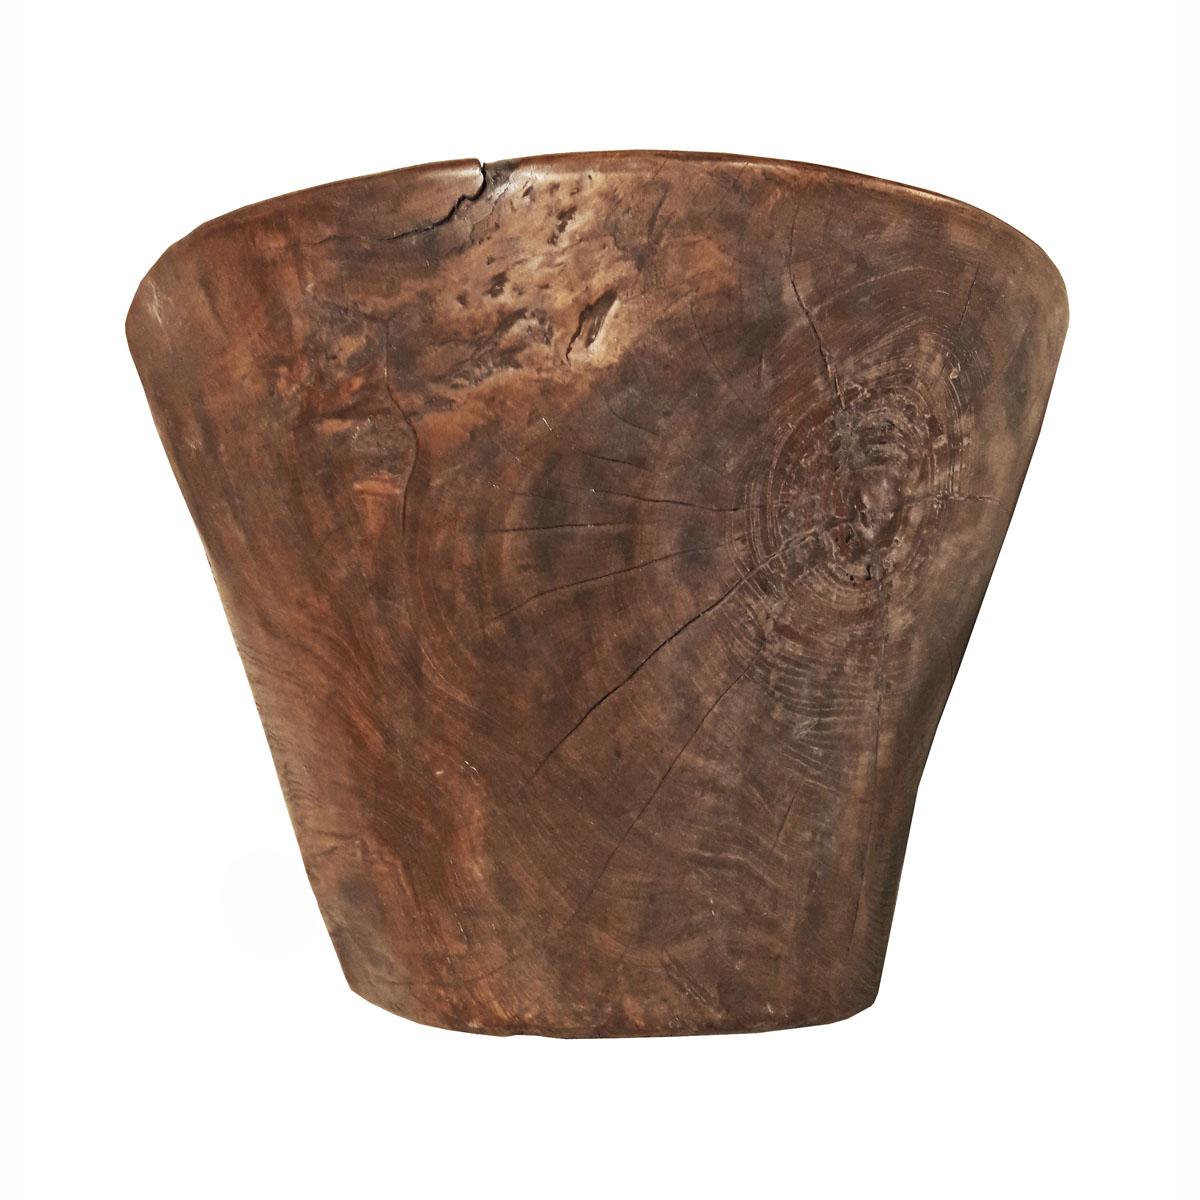 A large teak wood bowl from Indonesia, circa 1960. 

Hand carved from a single piece of solid wood, the distressed appearance of this piece makes it an attractive focal point in any rustic or Minimalist decor. Can be used as a planter or cachepot, a